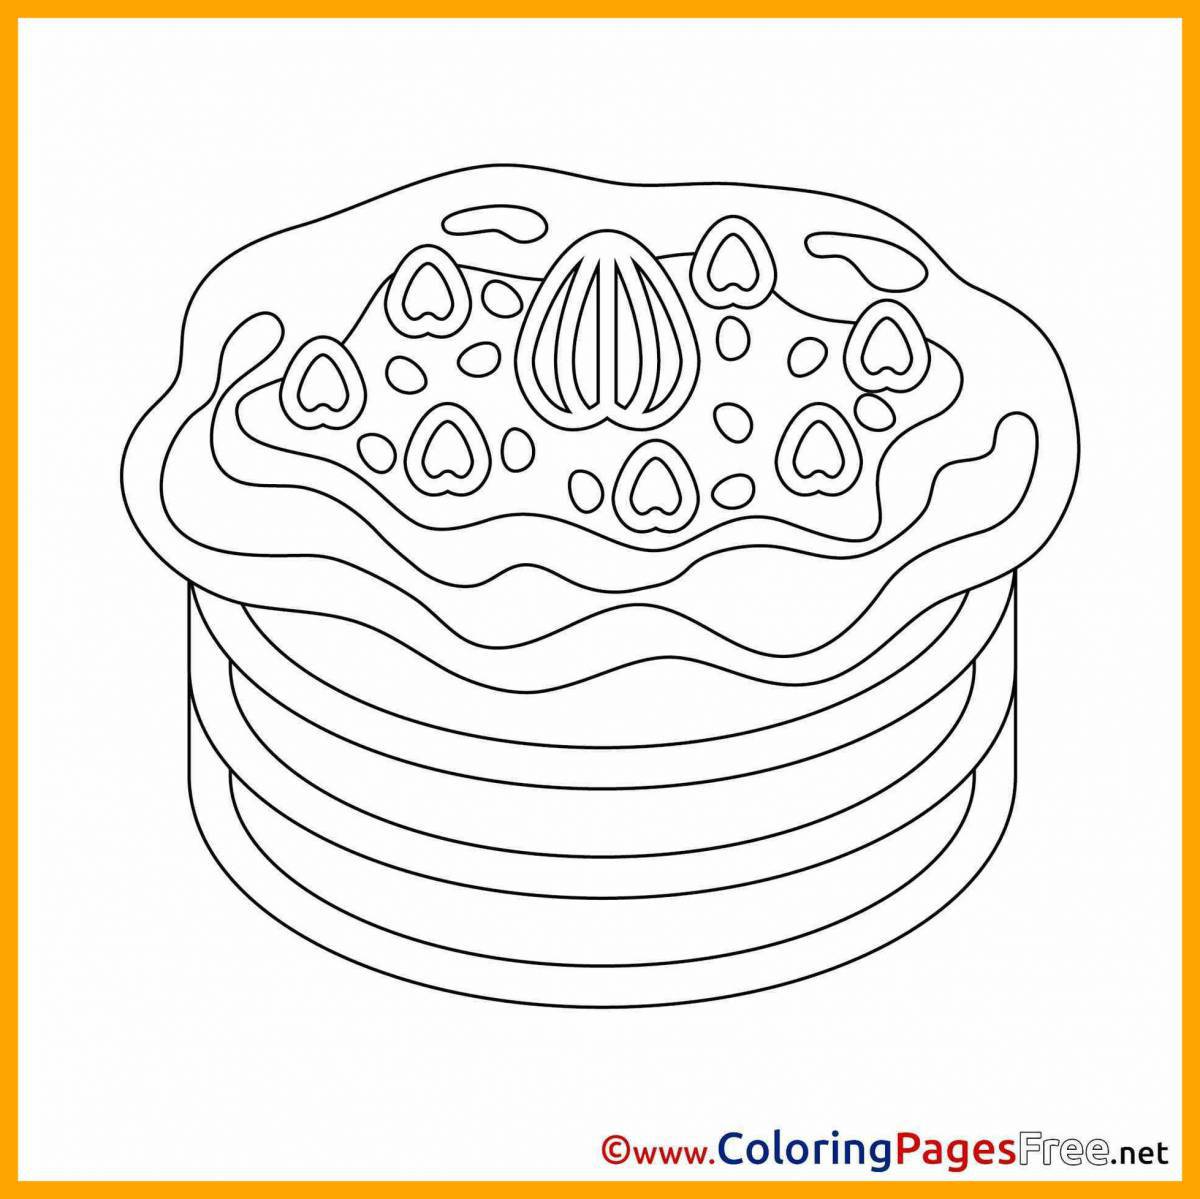 Delicious pancakes coloring page